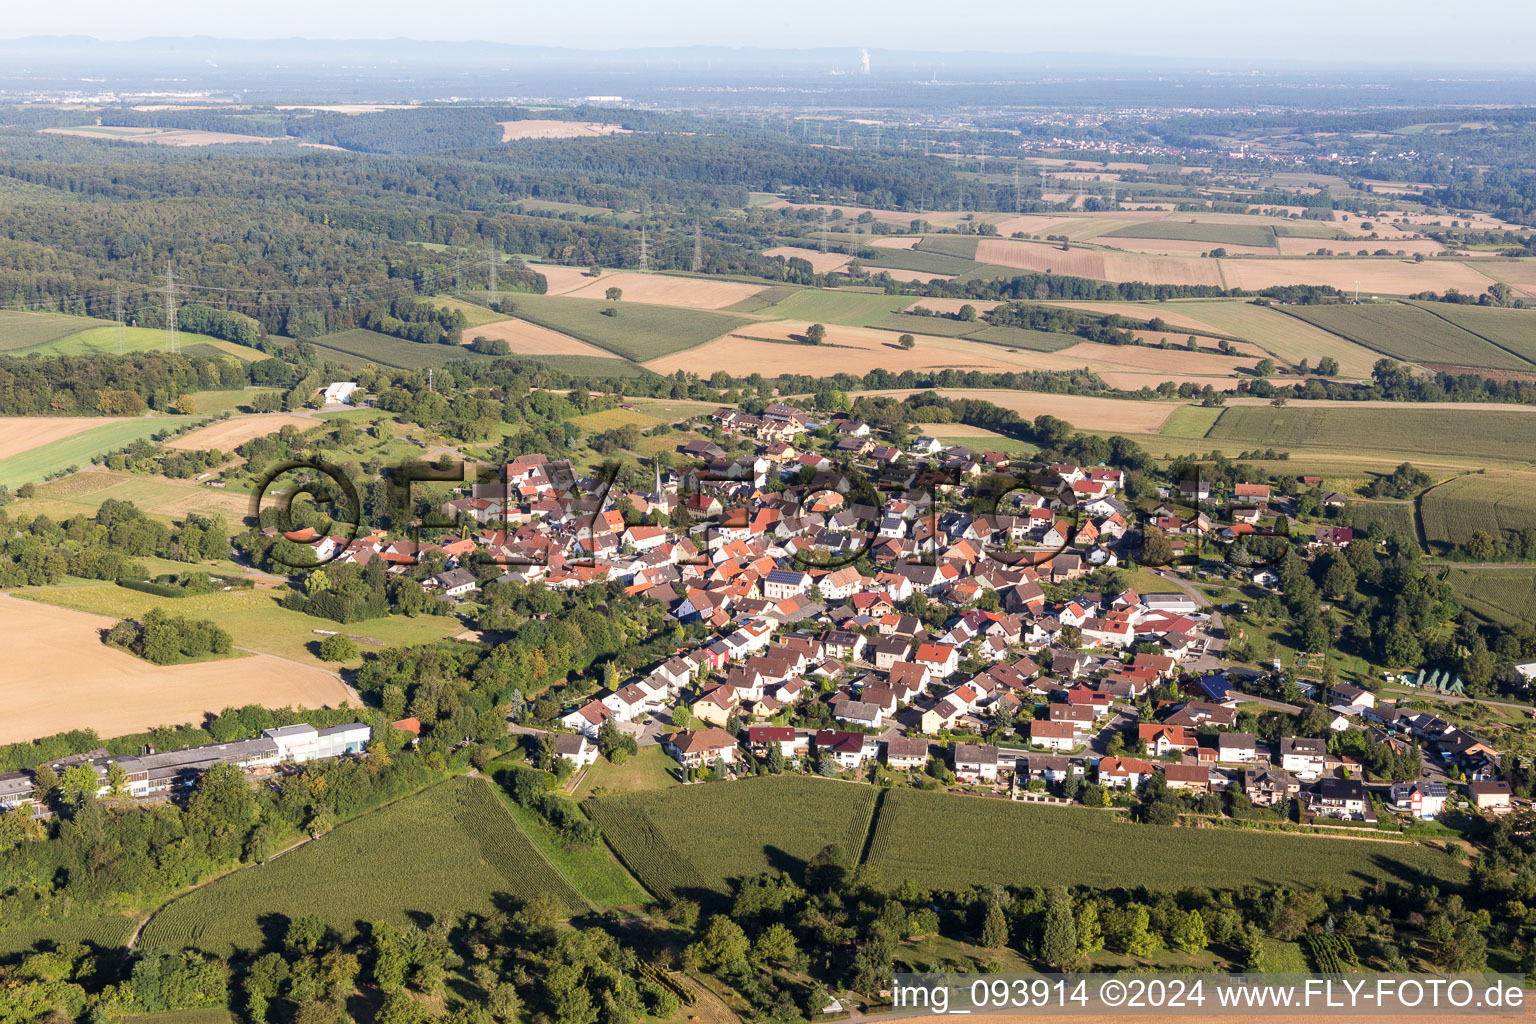 Village - view on the edge of agricultural fields and farmland in the district Oberacker in Kraichtal in the state Baden-Wurttemberg, Germany